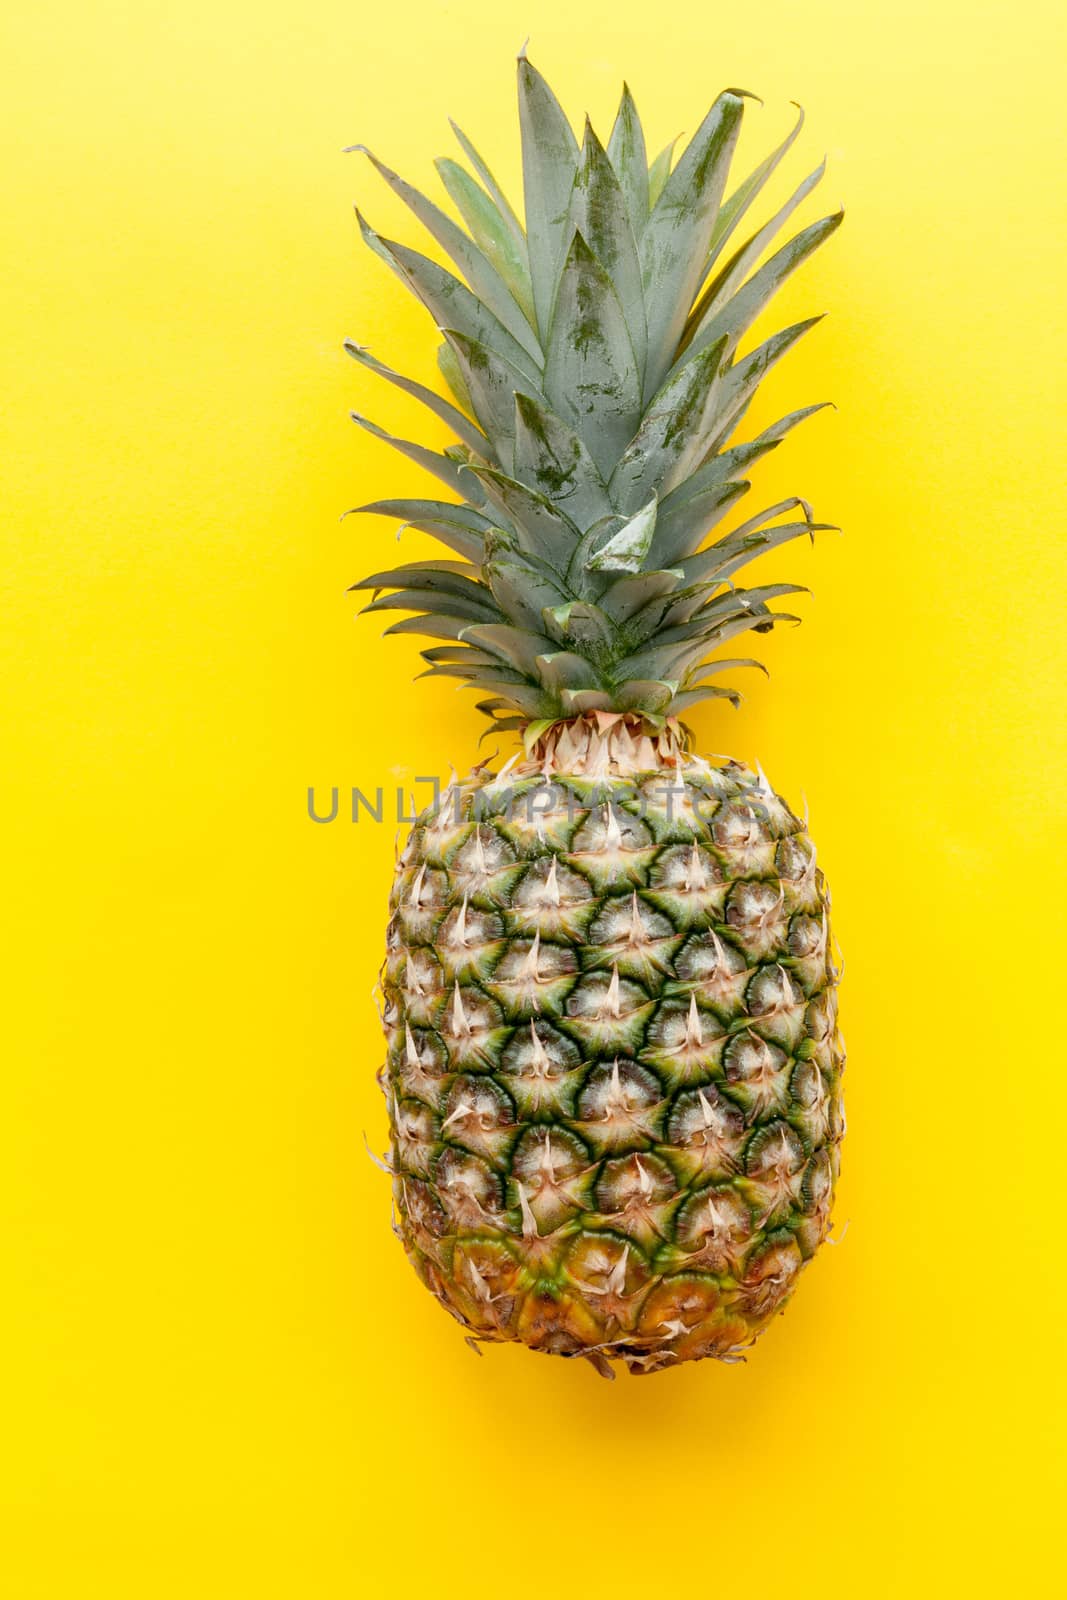 Pineapple on a solid yellow background by andongob